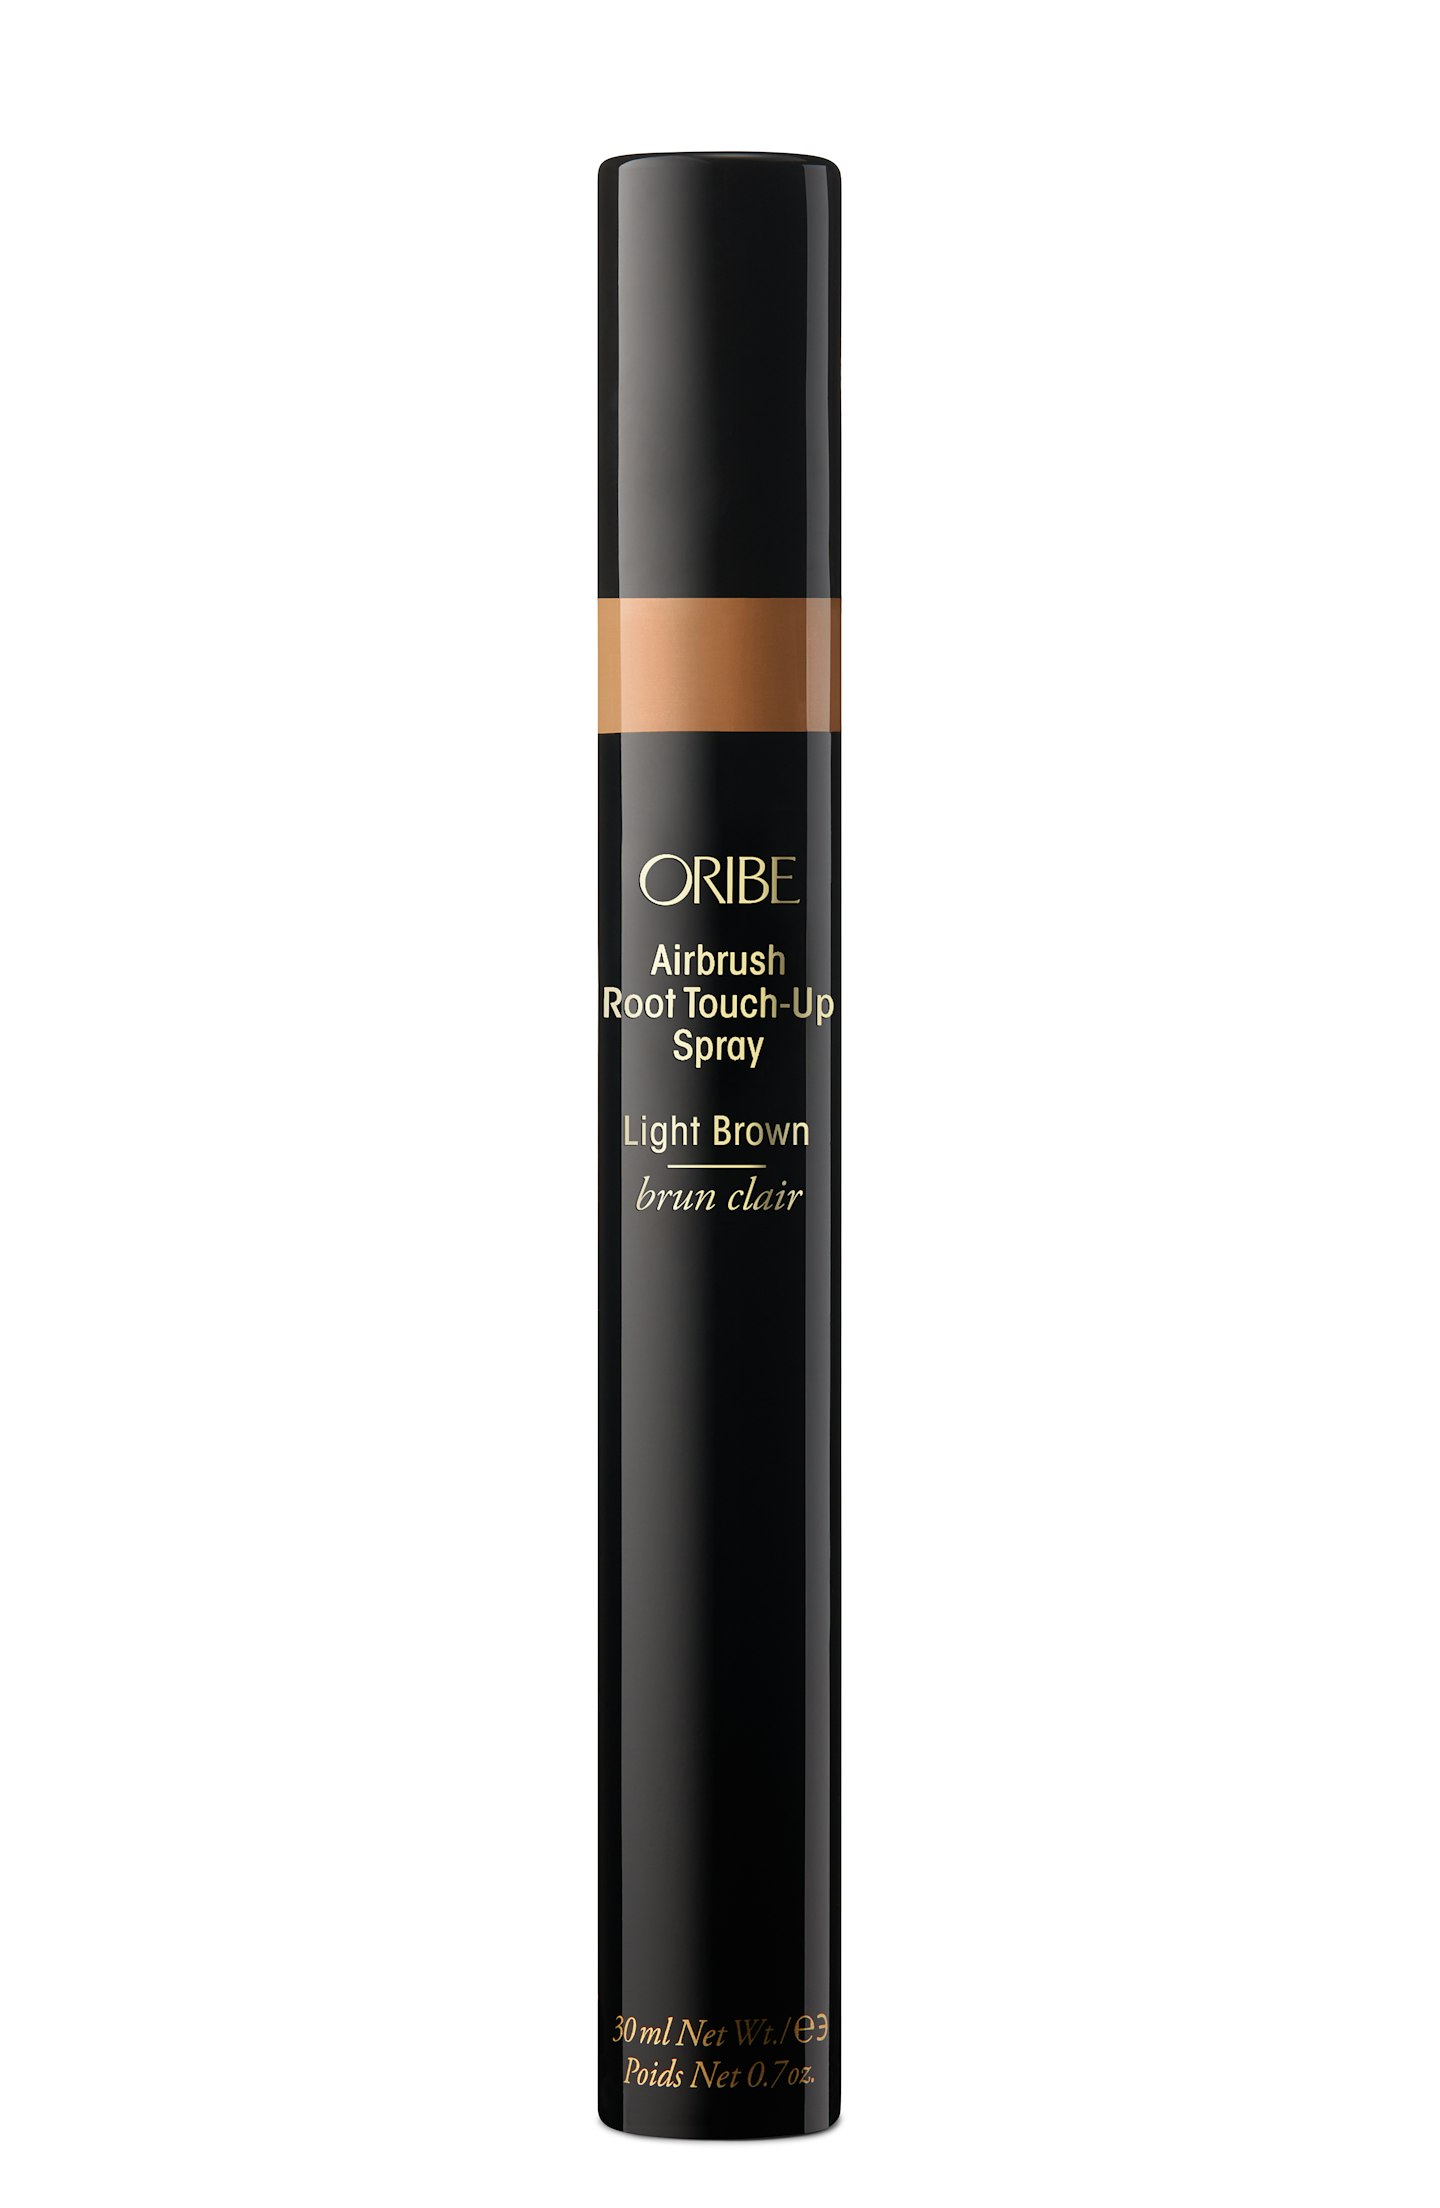 Oribe Airbrush Root Touch-Up Spray, £31.50